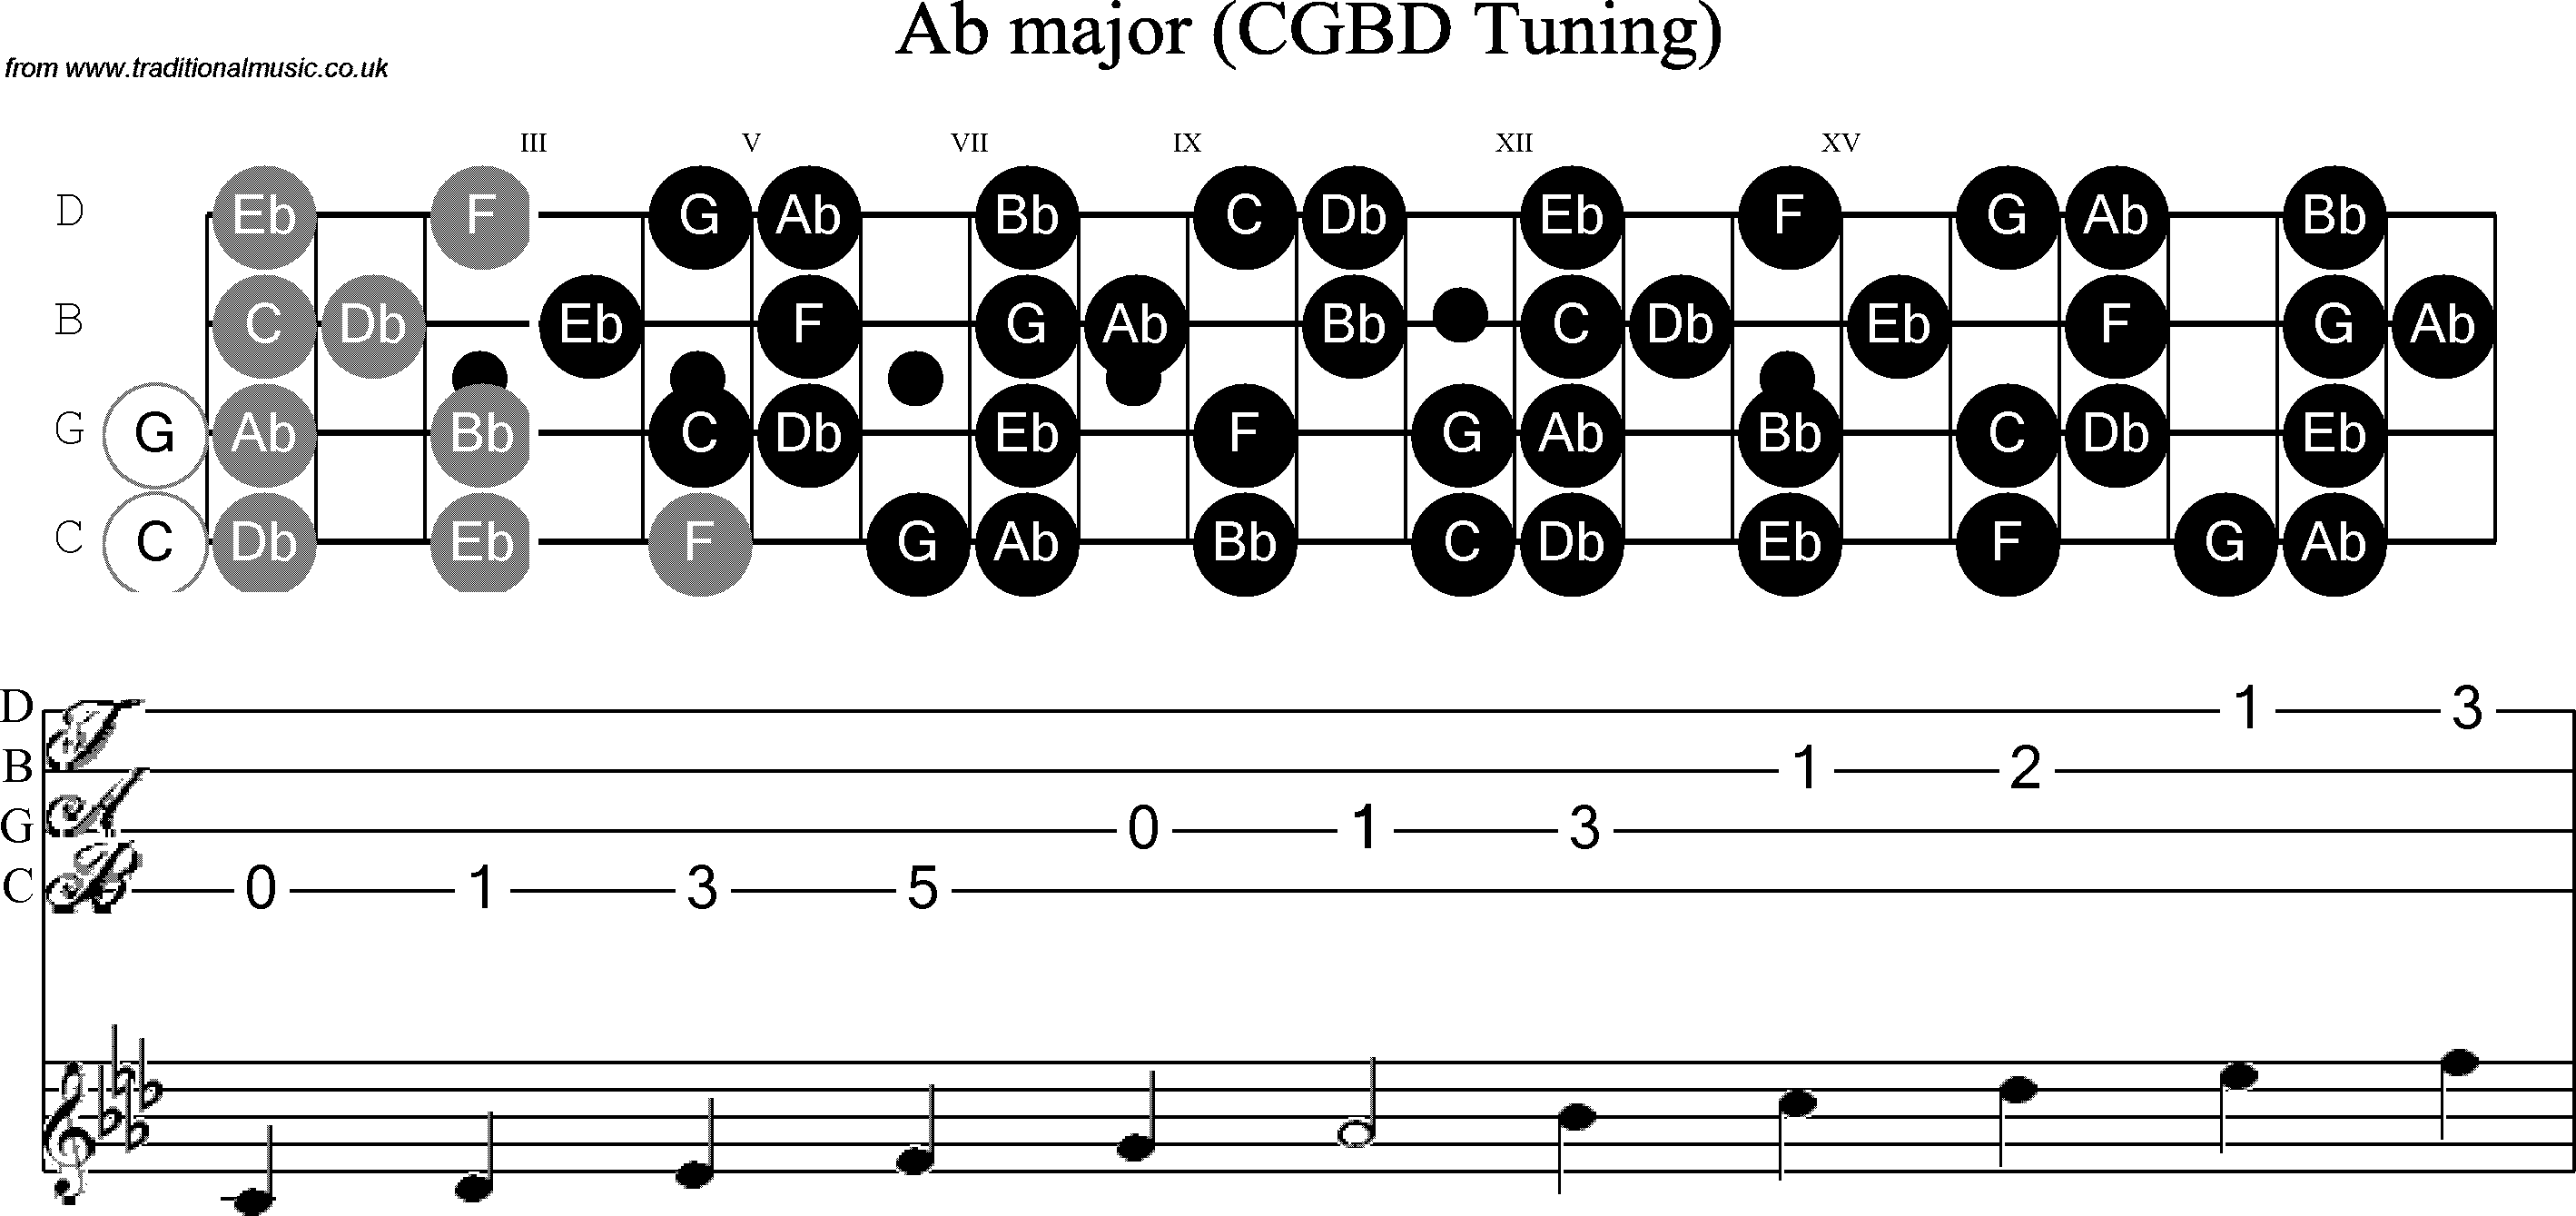 Scale, stave and neck diagram for Banjo(C / plectrunm tuned) Ab